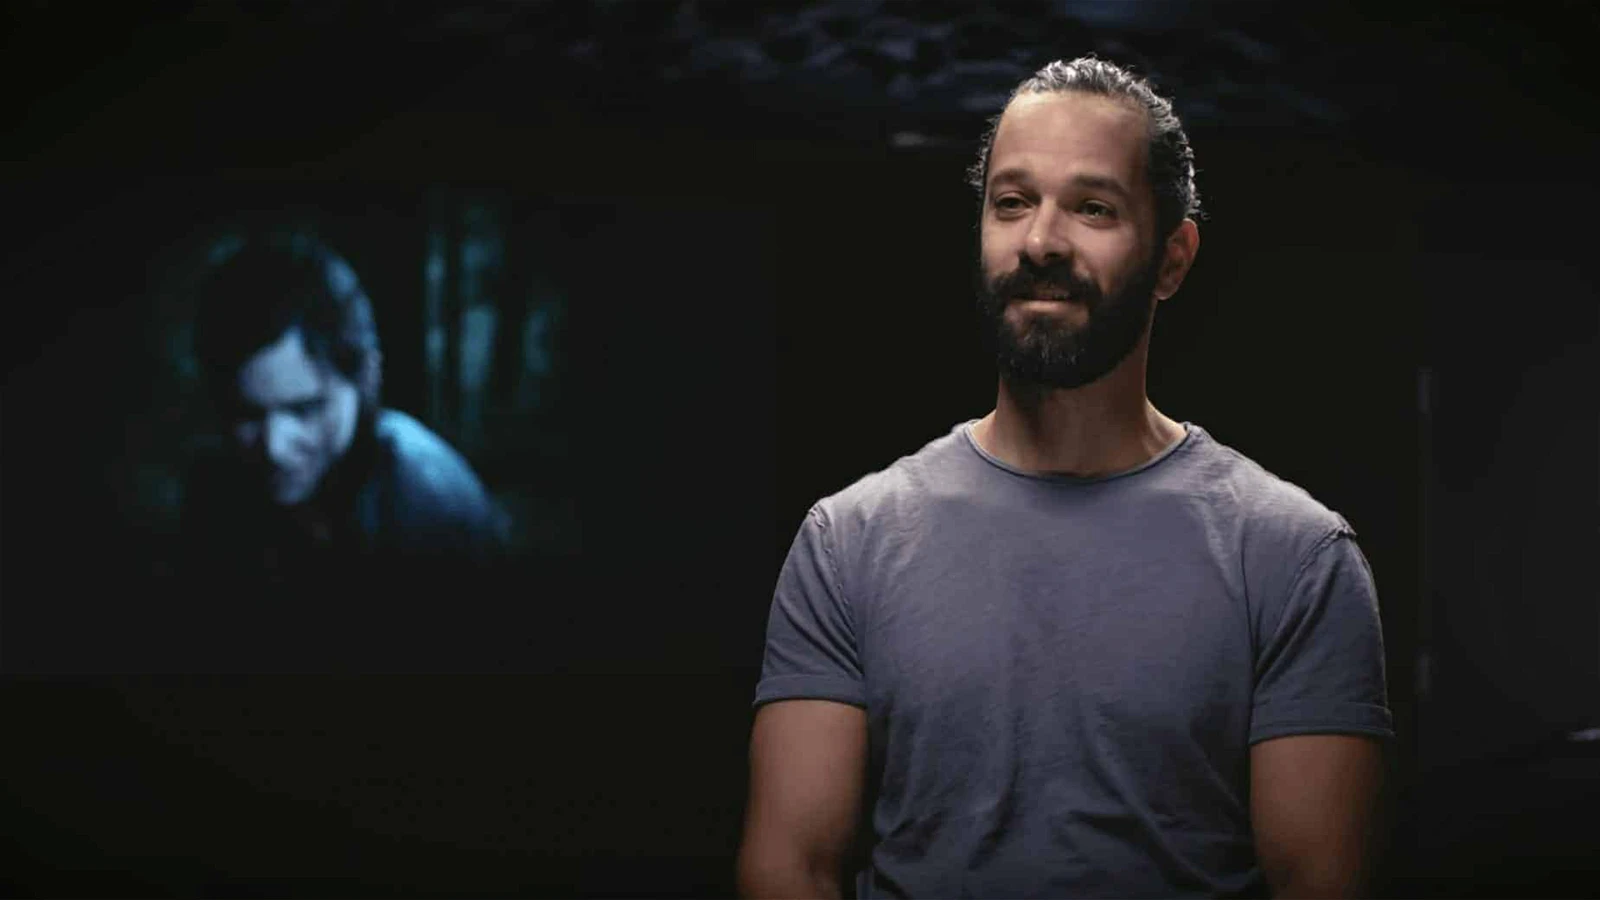 Neil Druckmann - Director of The Last of Us Part 2